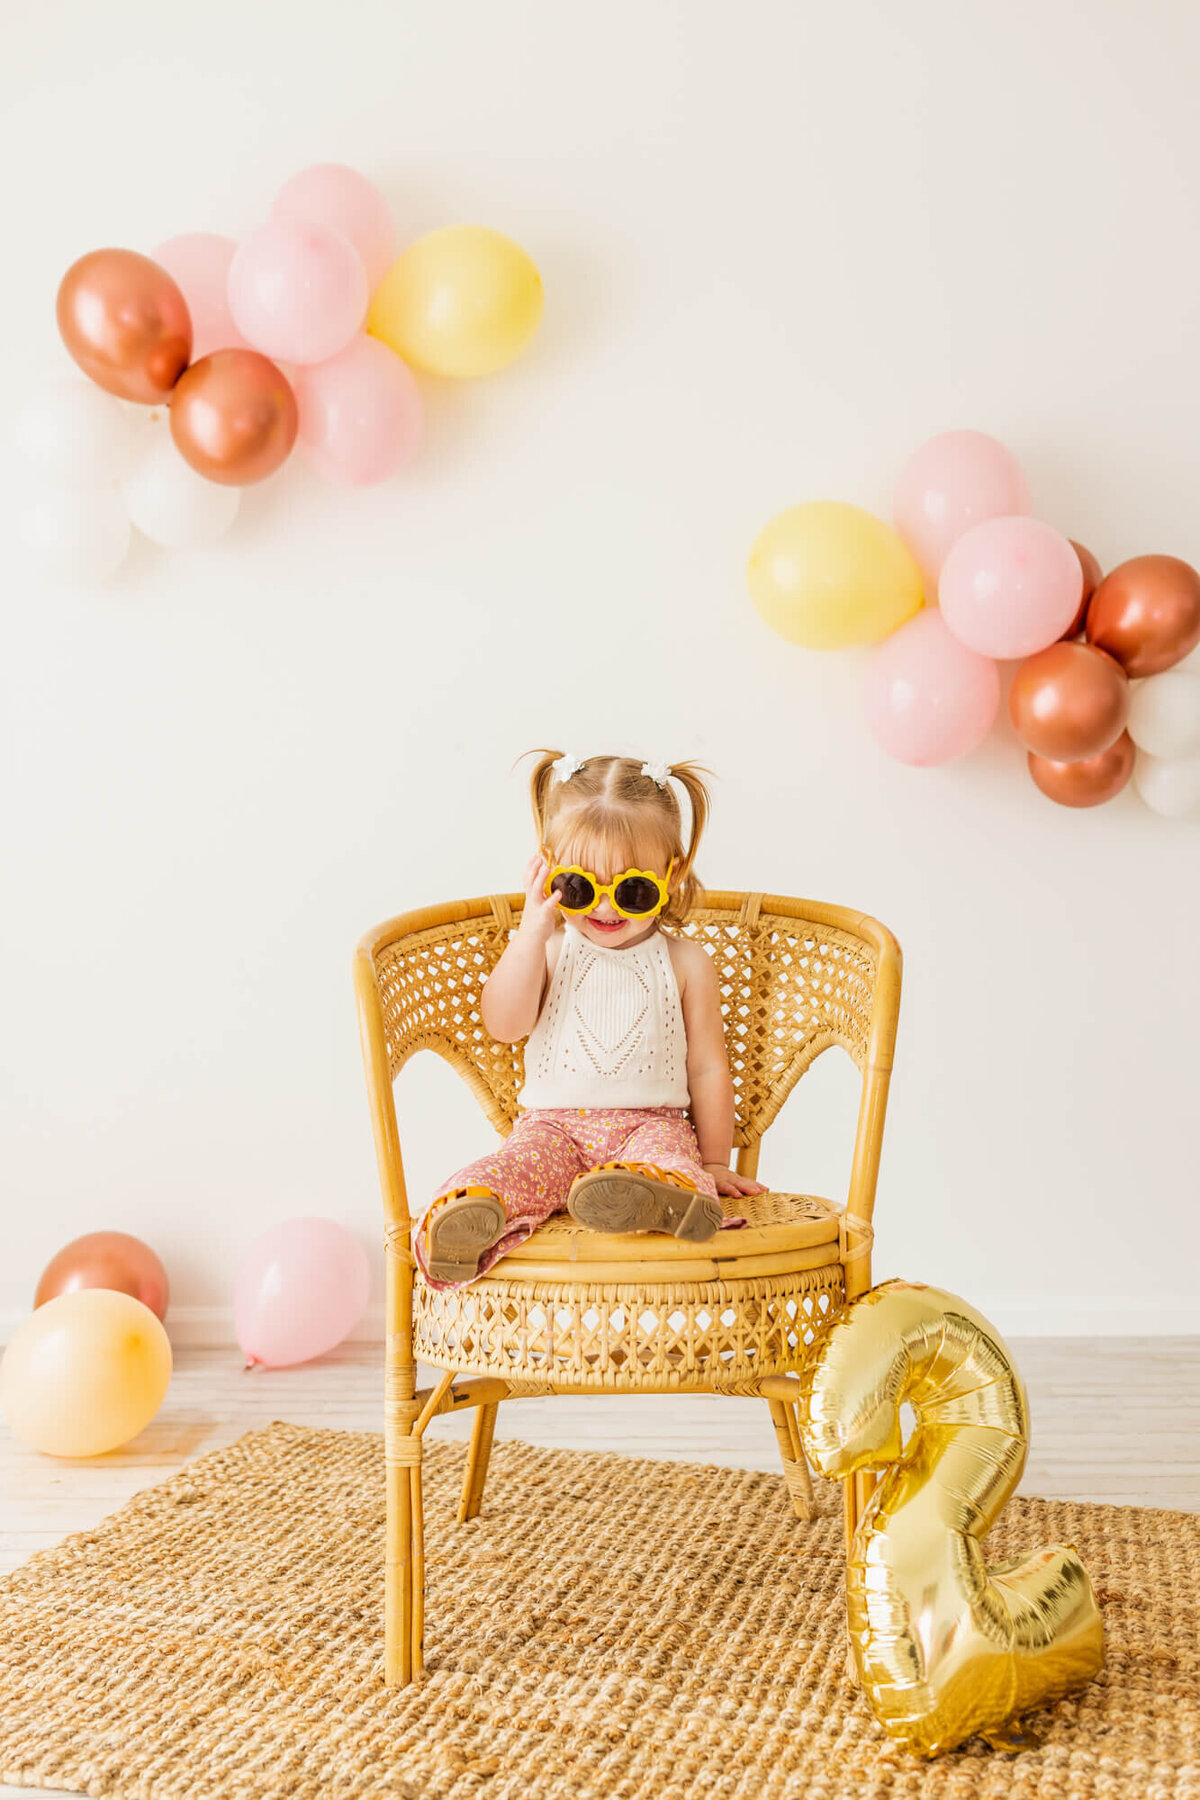 Toddler girl dresses in bell bottoms and a lace romper sitting on wicker chair with sunglasses on